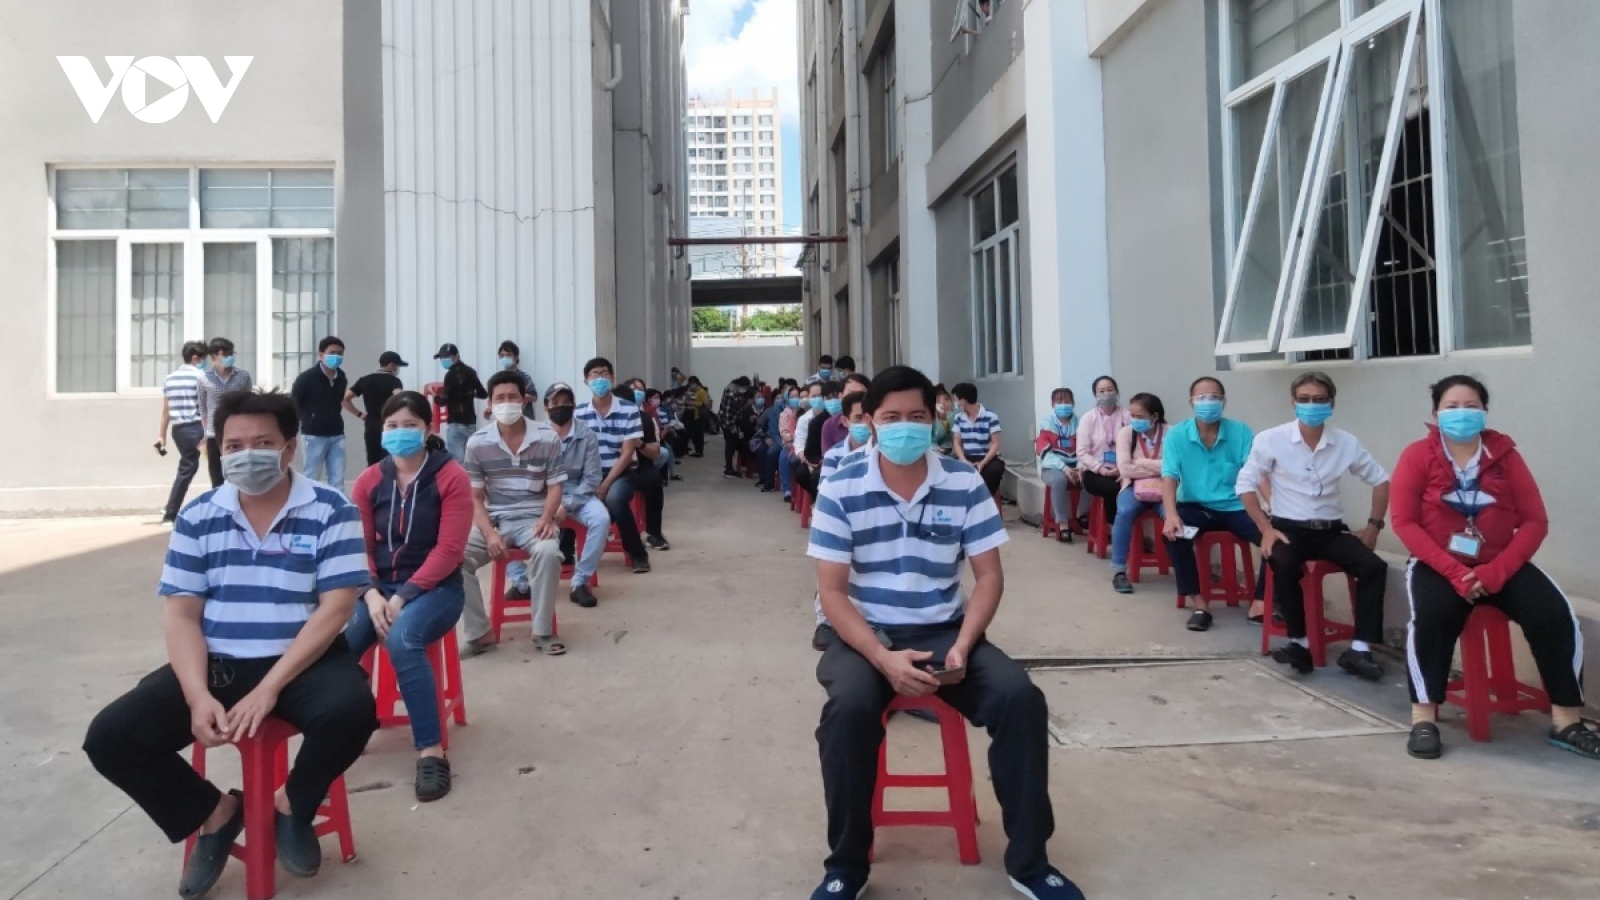 COVID-19: 90 more cases recorded in Vietnam, 63 cases in HCM City alone